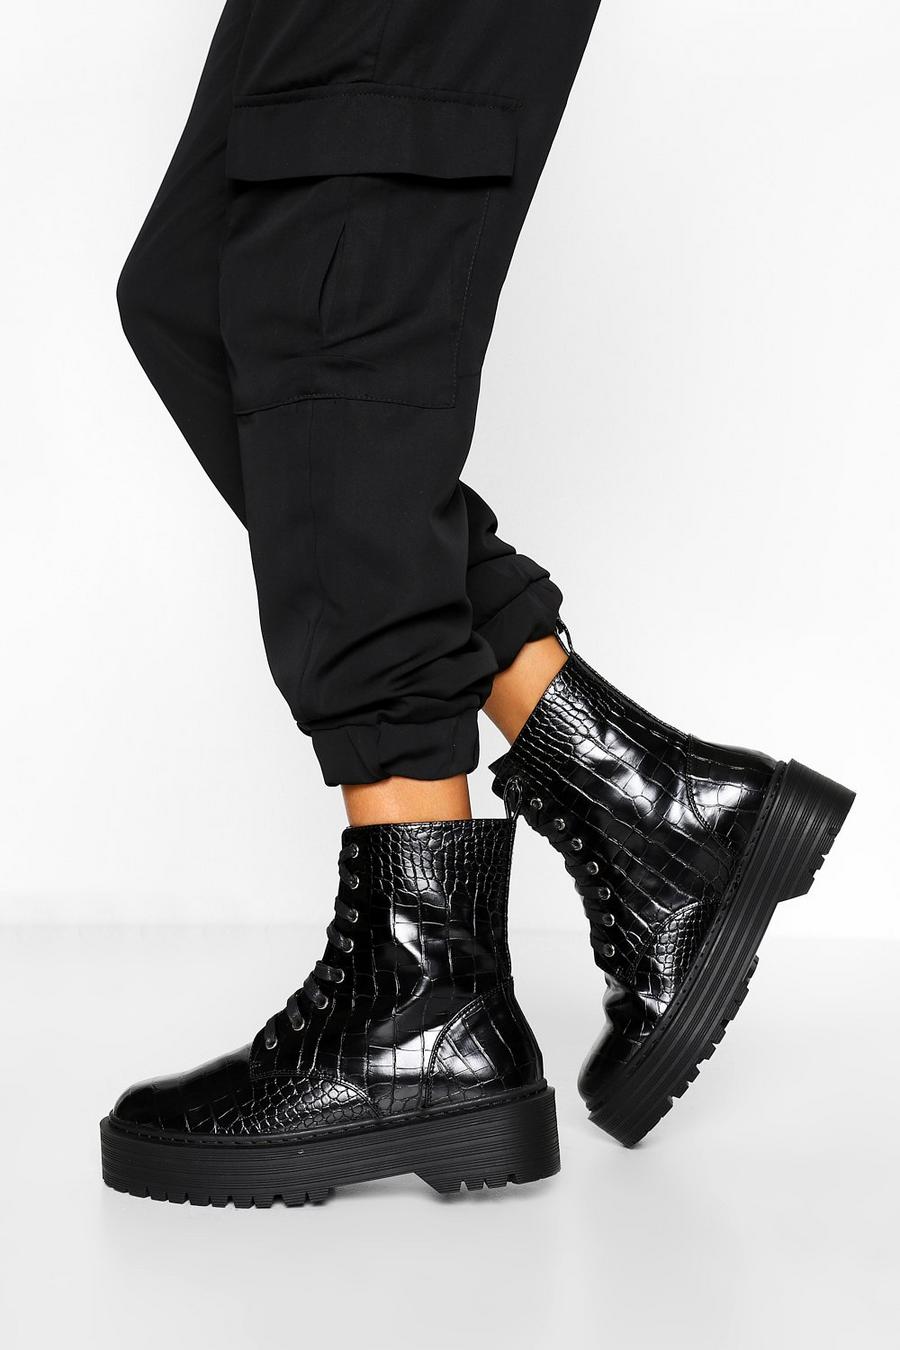 Wide Width Croc Chunky Combat Boots